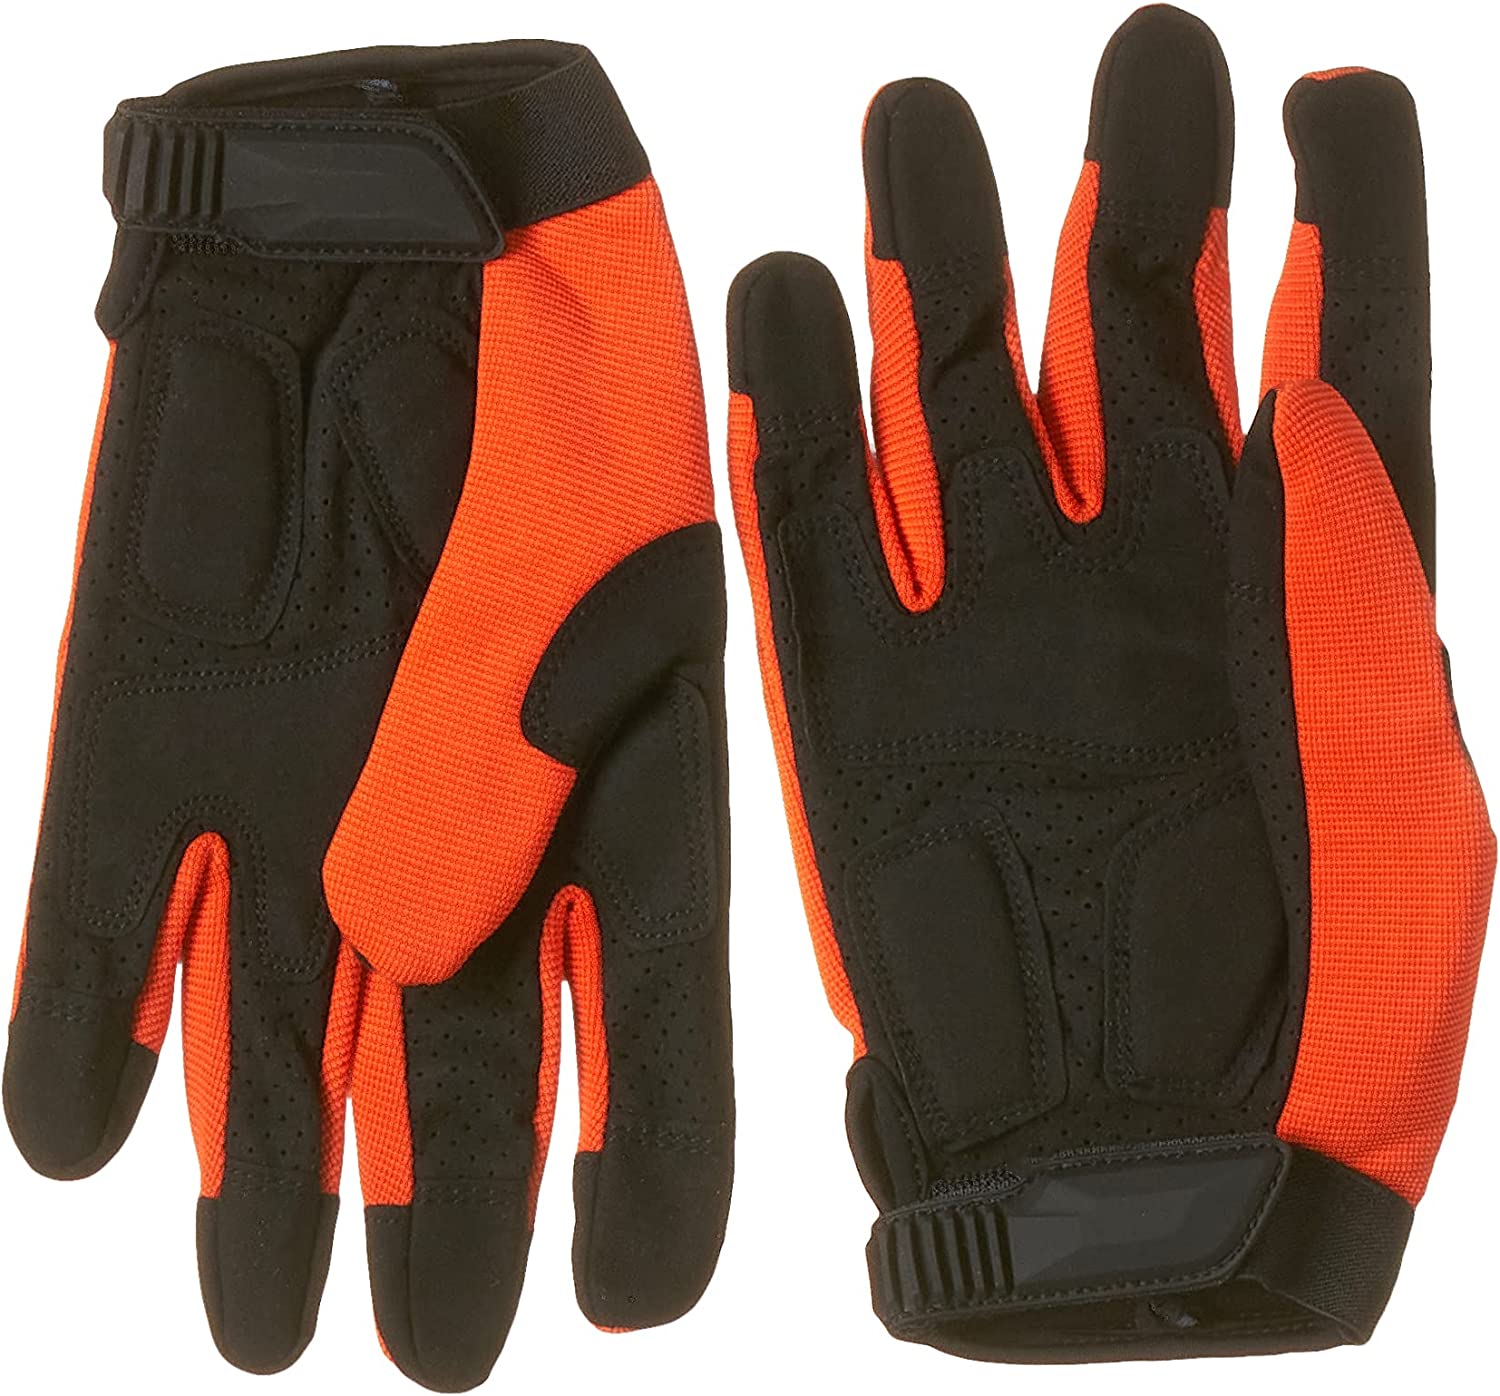 ARB Recovery Gloves